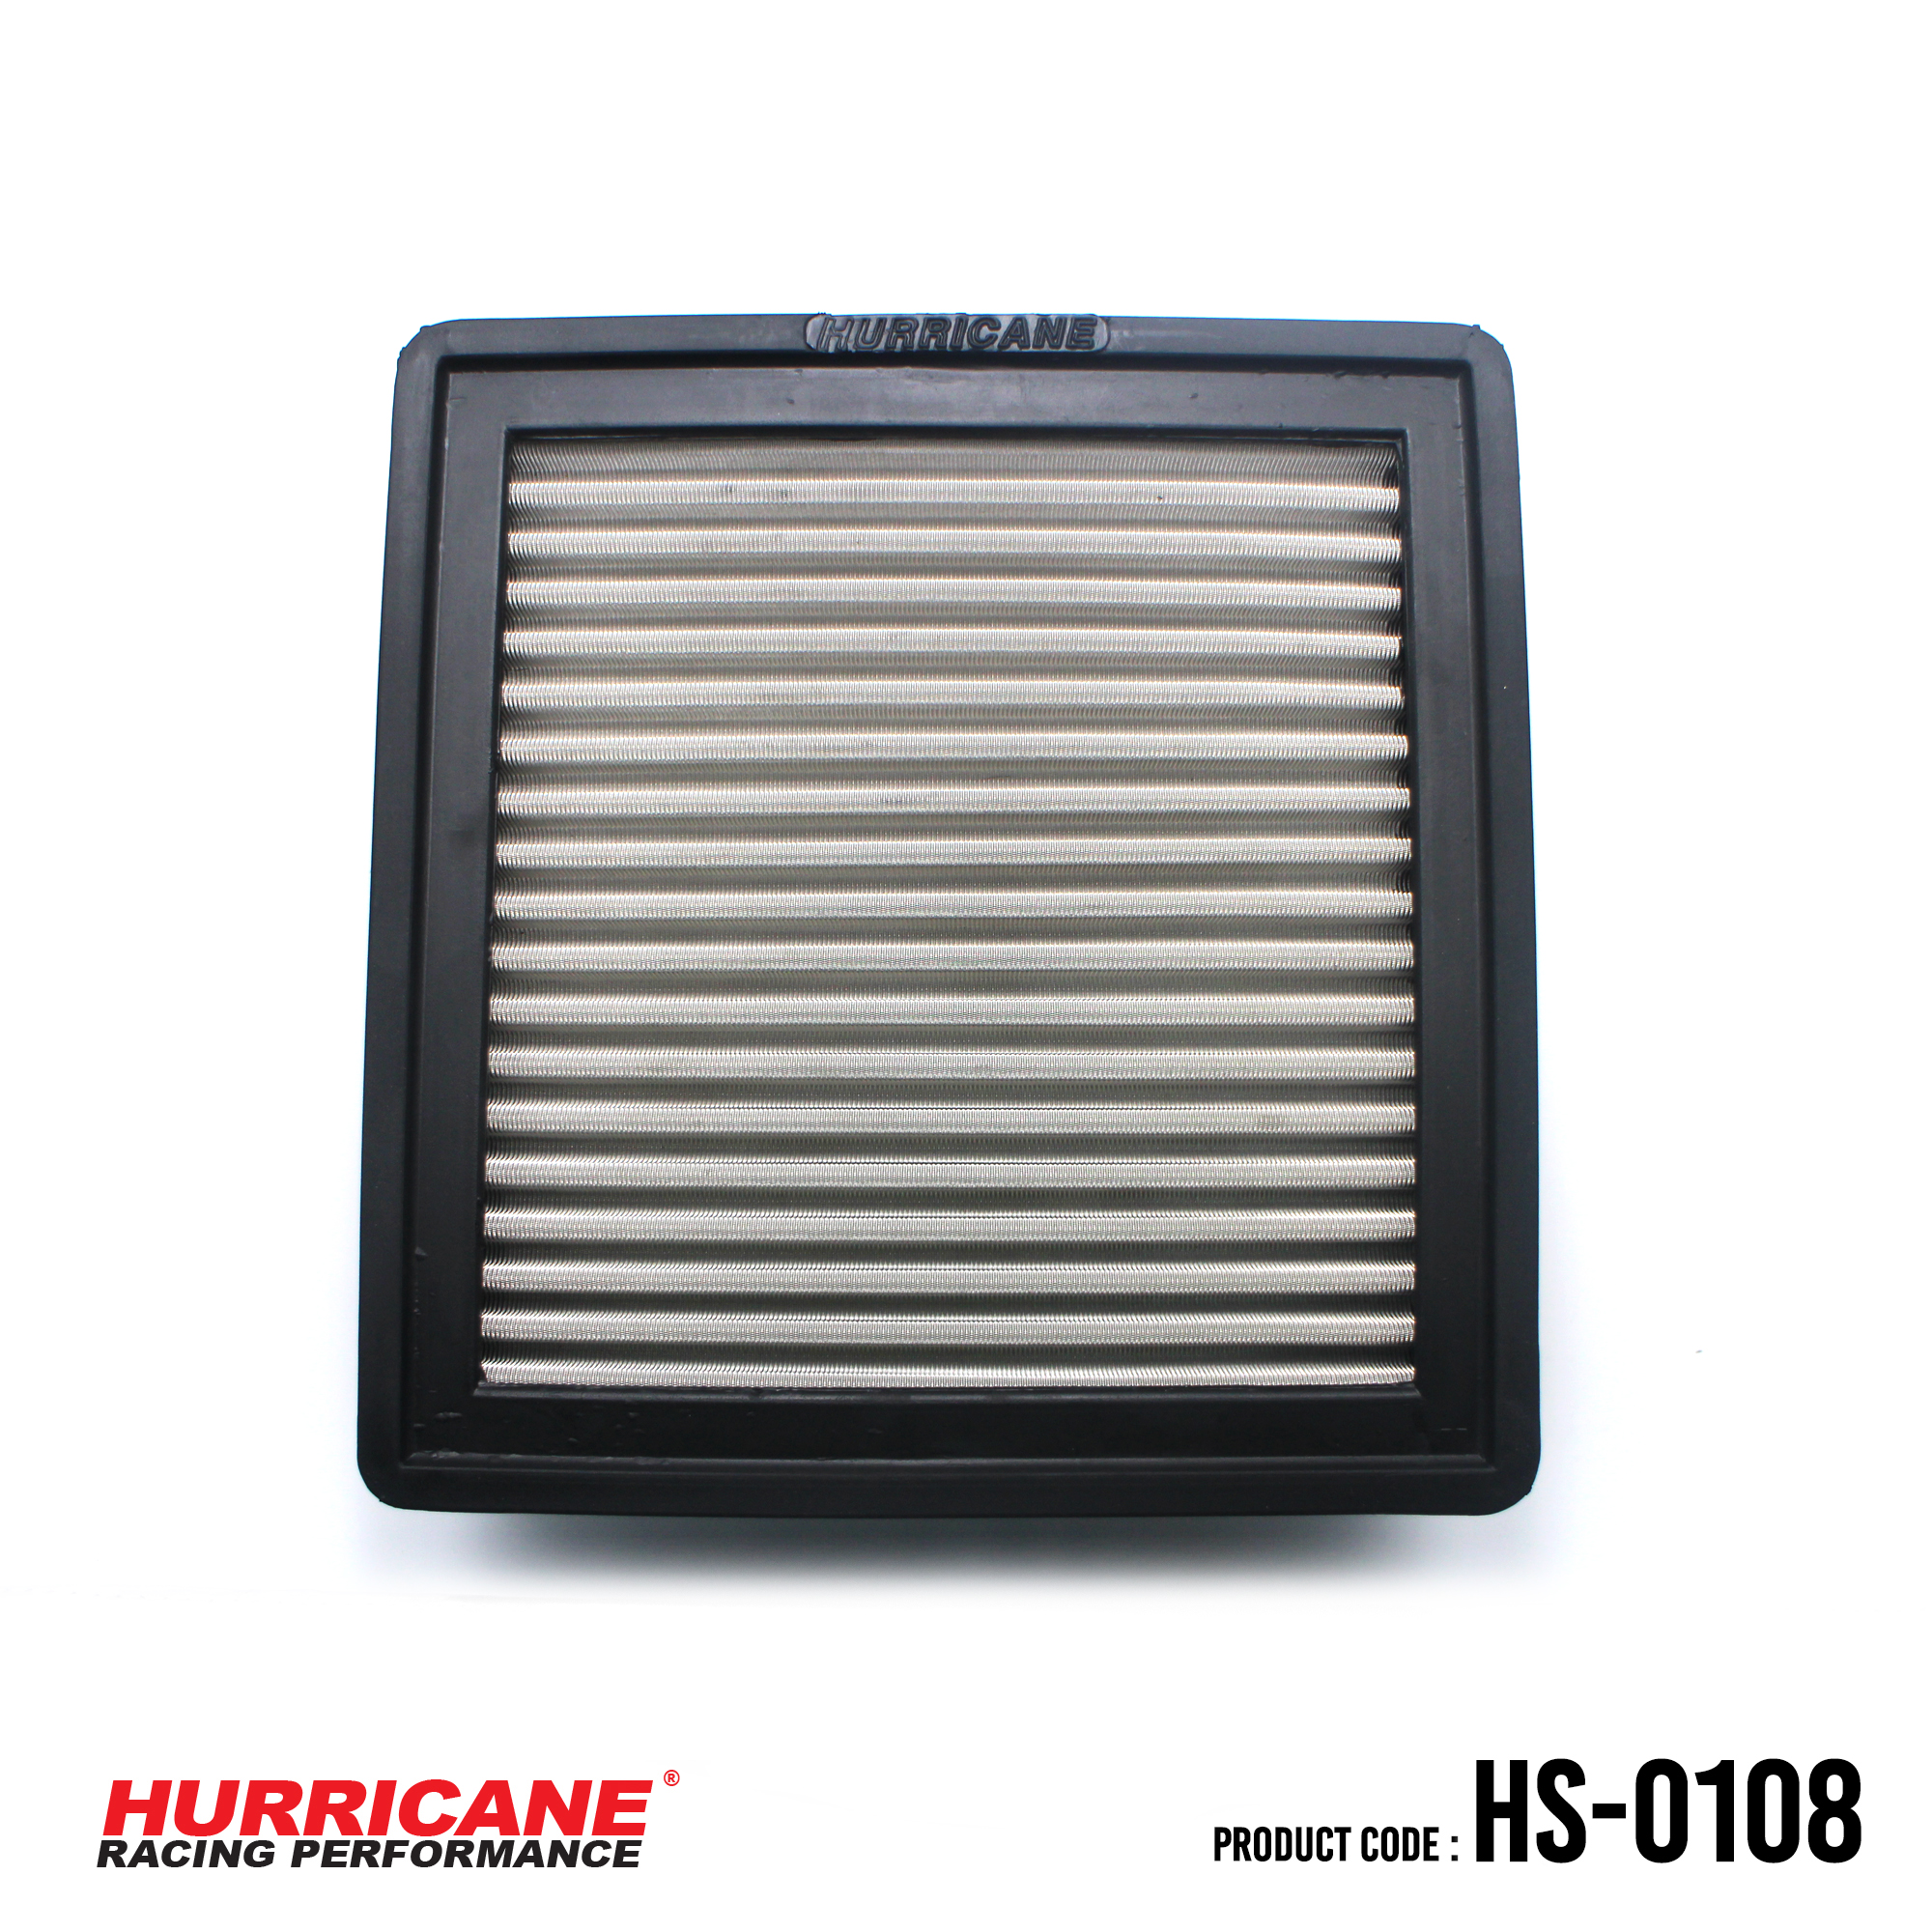 HURRICANE STAINLESS STEEL AIR FILTER FOR HS-0108 Mitsubishi